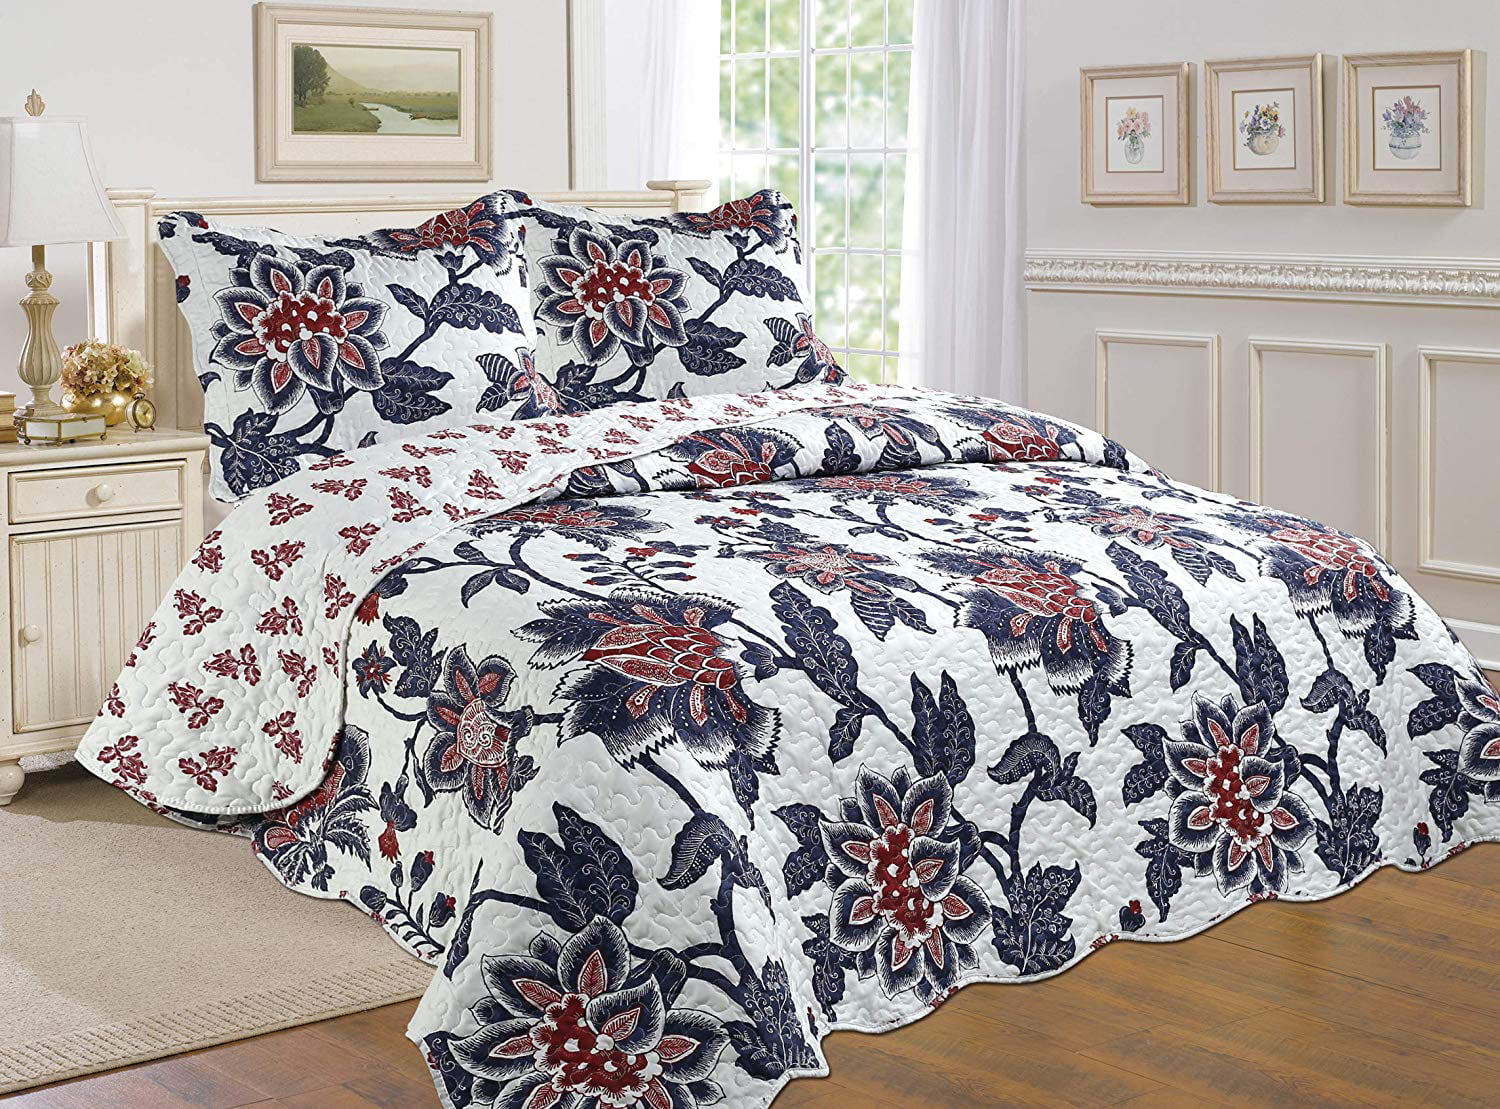 ALL FOR YOU 3pc Reversible Bedspread Pattern 115 Coverlet,Quilt Set 